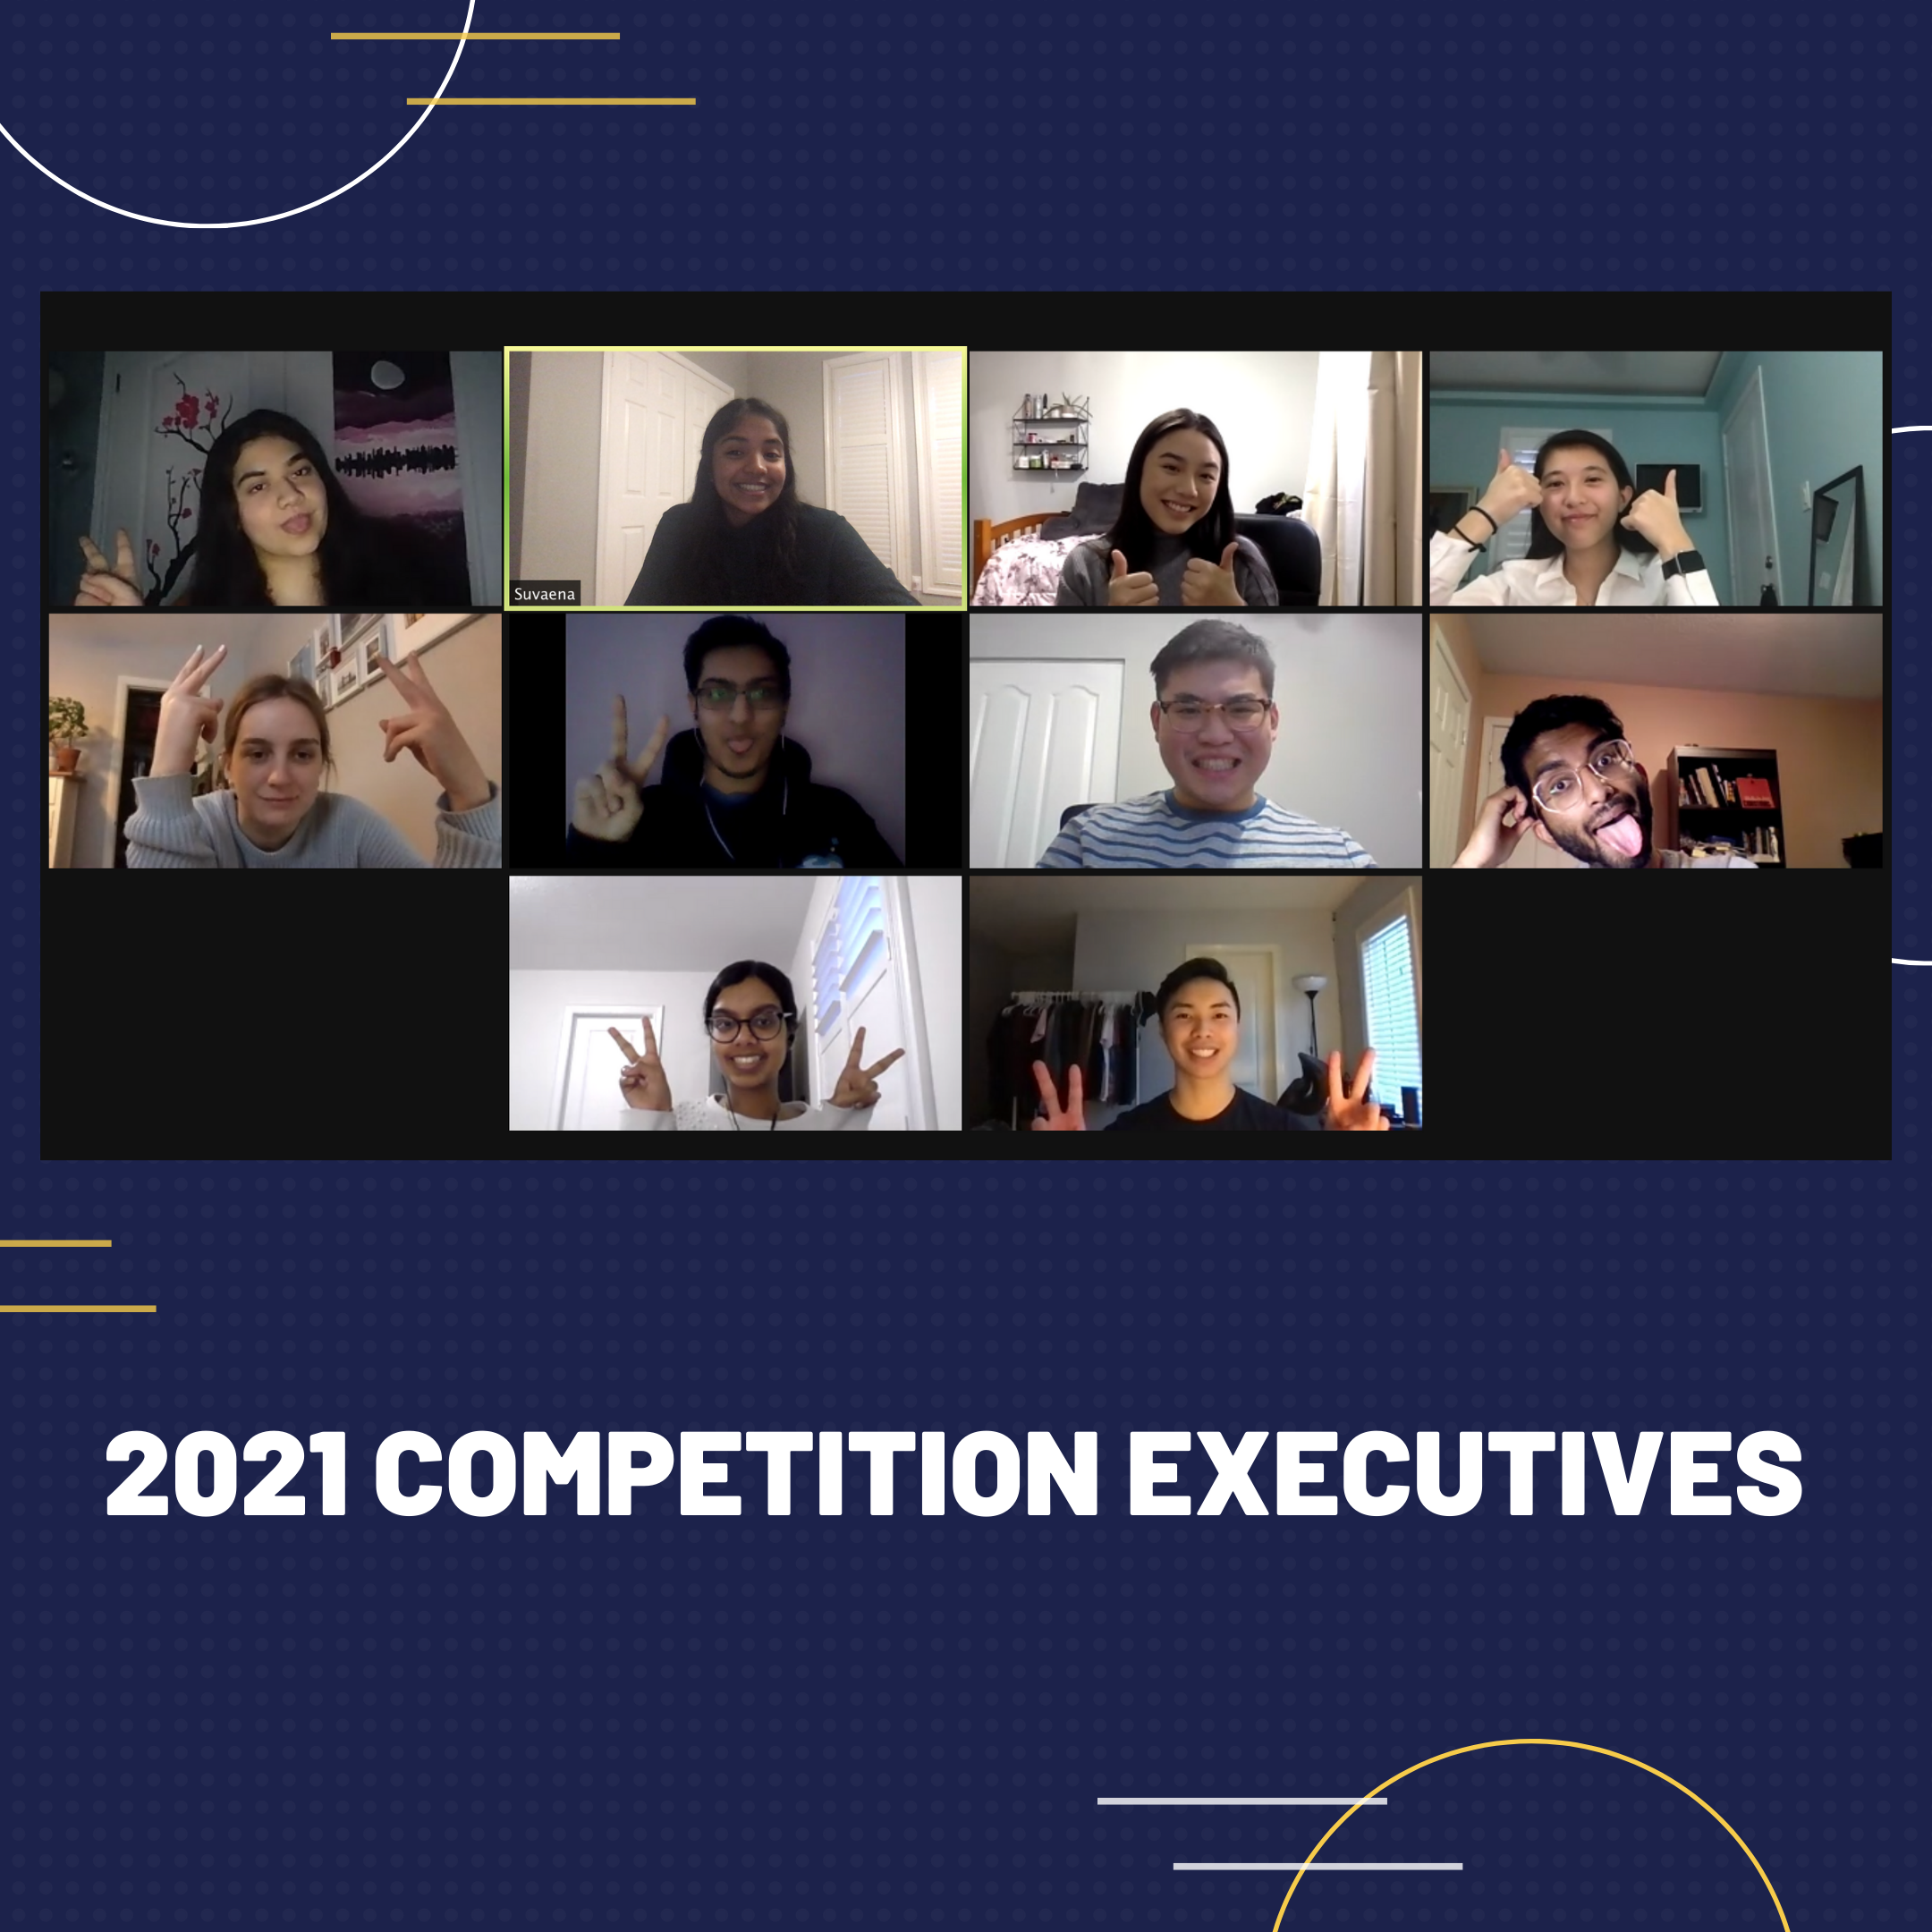 2021 competition executives